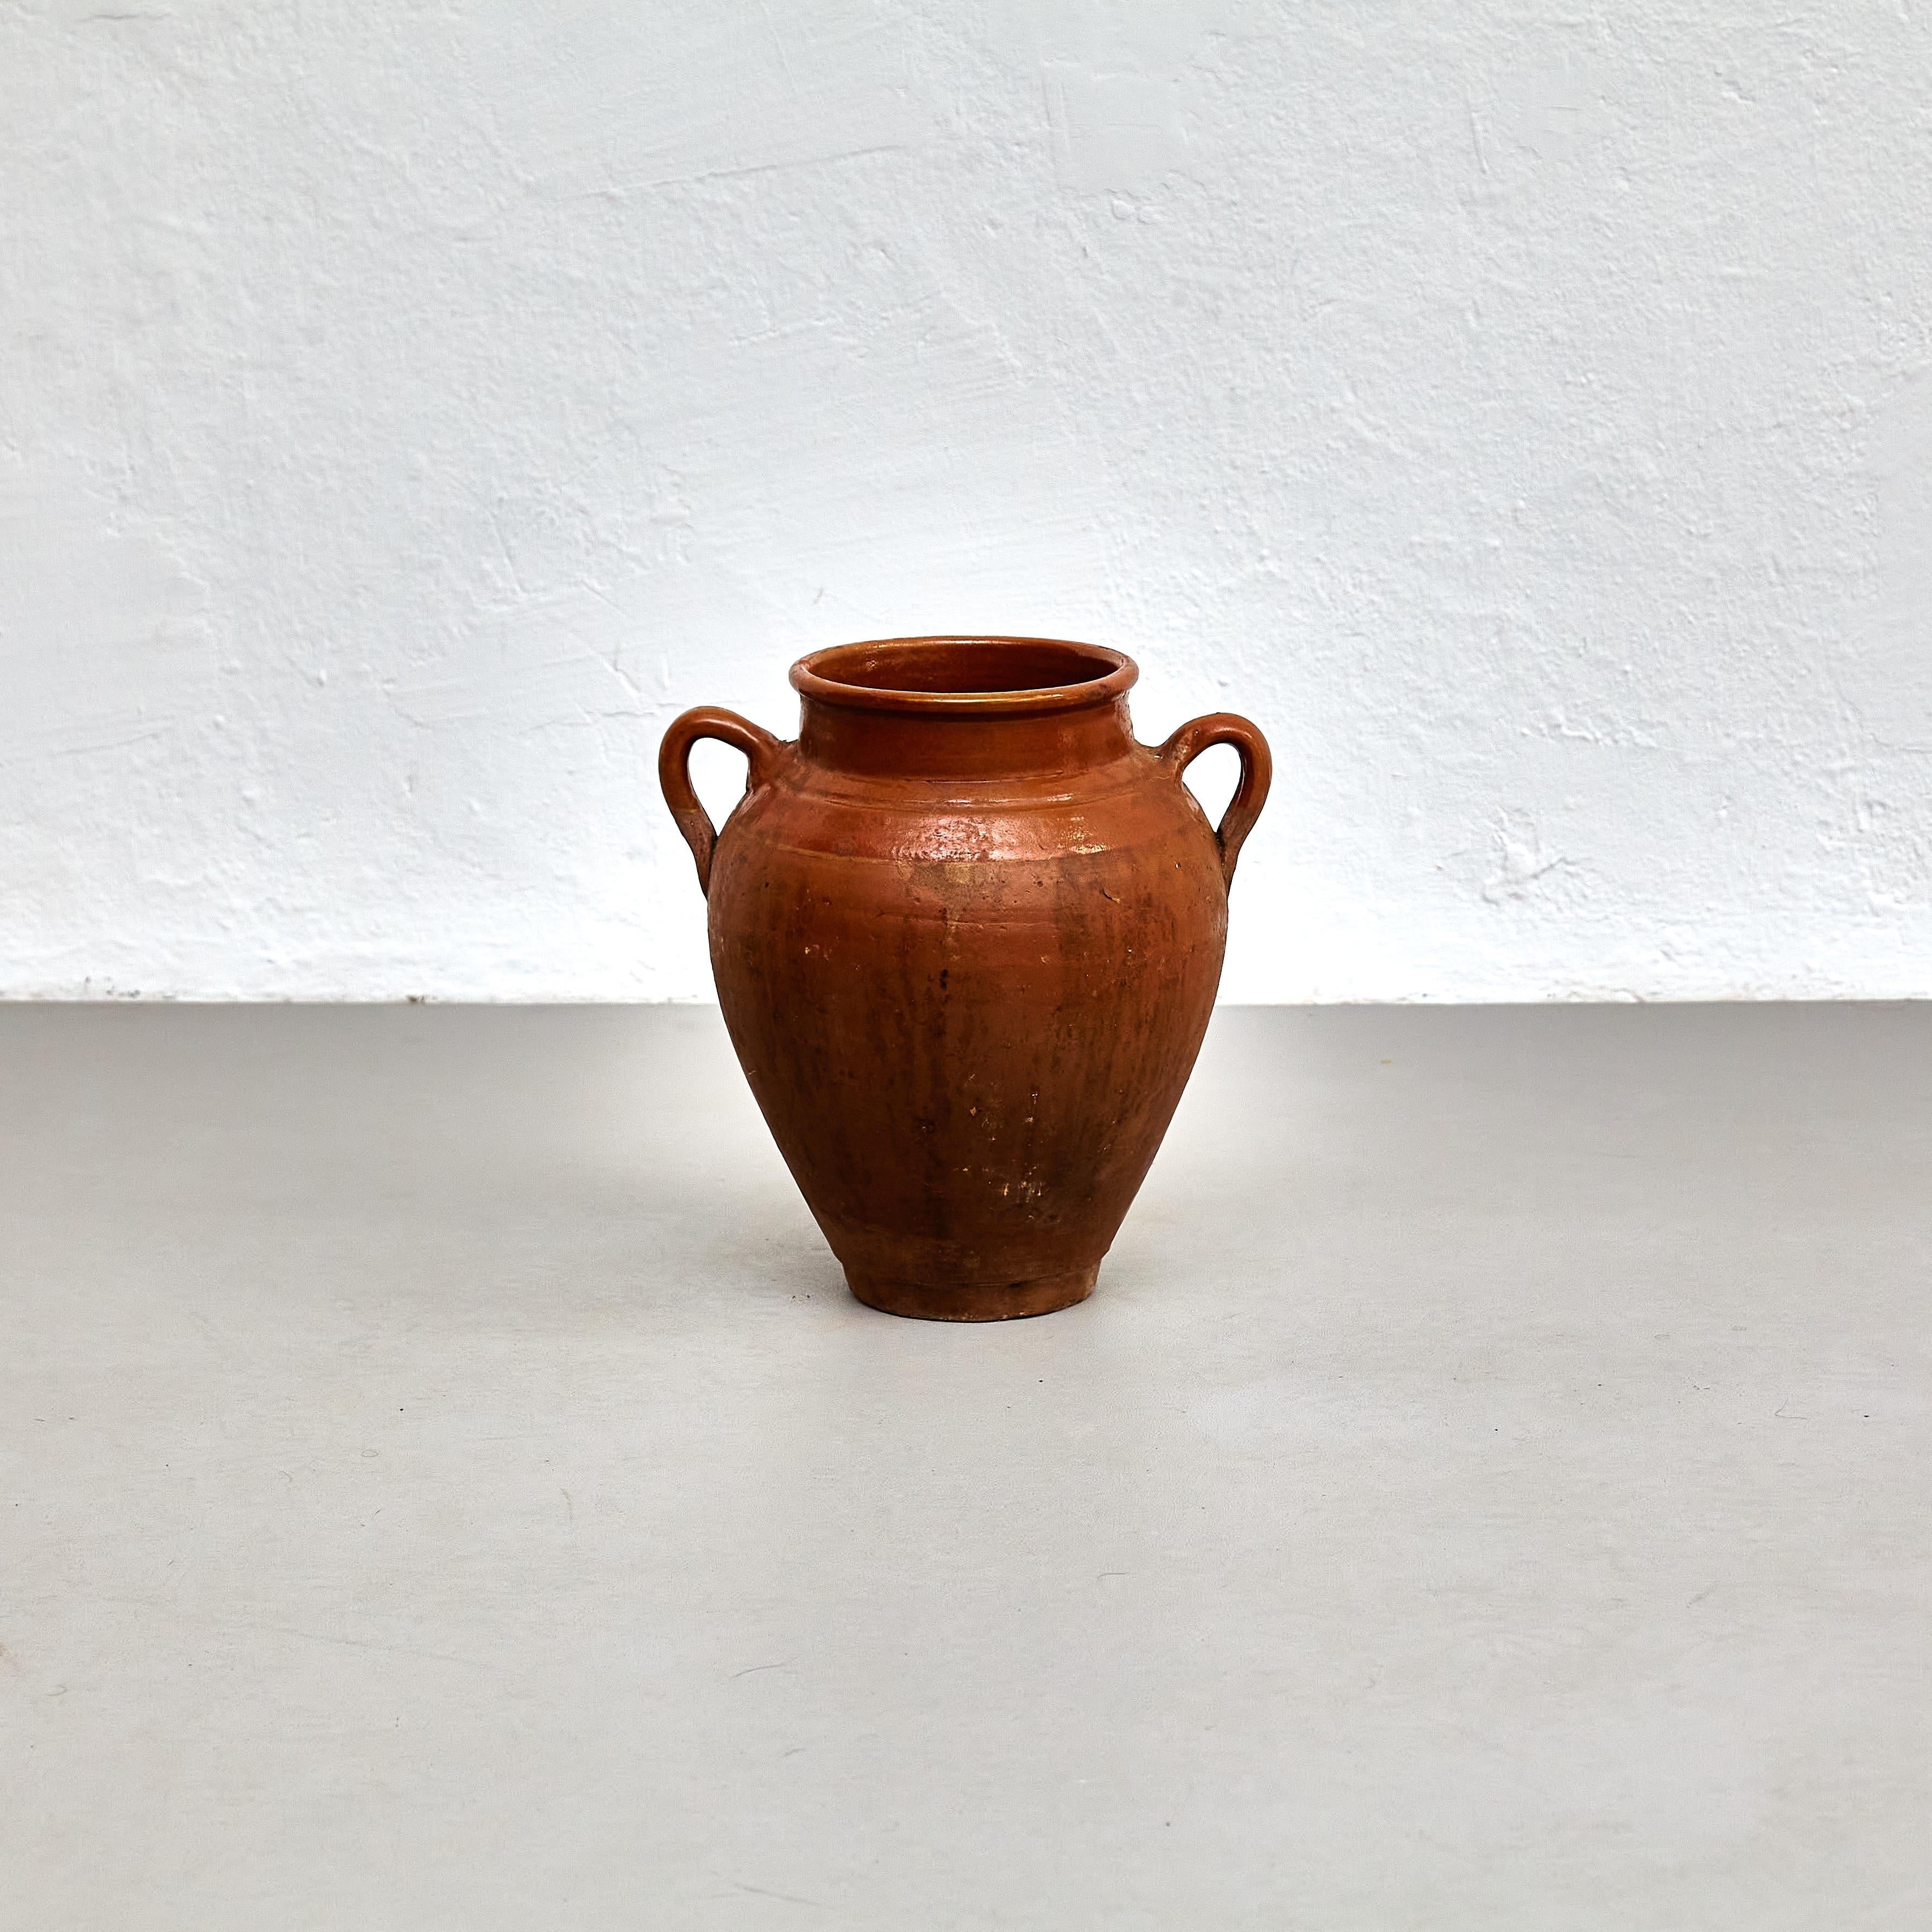 Early 20th century traditional Spanish ceramic vase.

Manufactured in Spain, early 20th century.

In original condition with minor wear consistent of age and use, preserving a beautiful patina.

Materials: 
Ceramic

Dimensions: 
Diam 25 cm